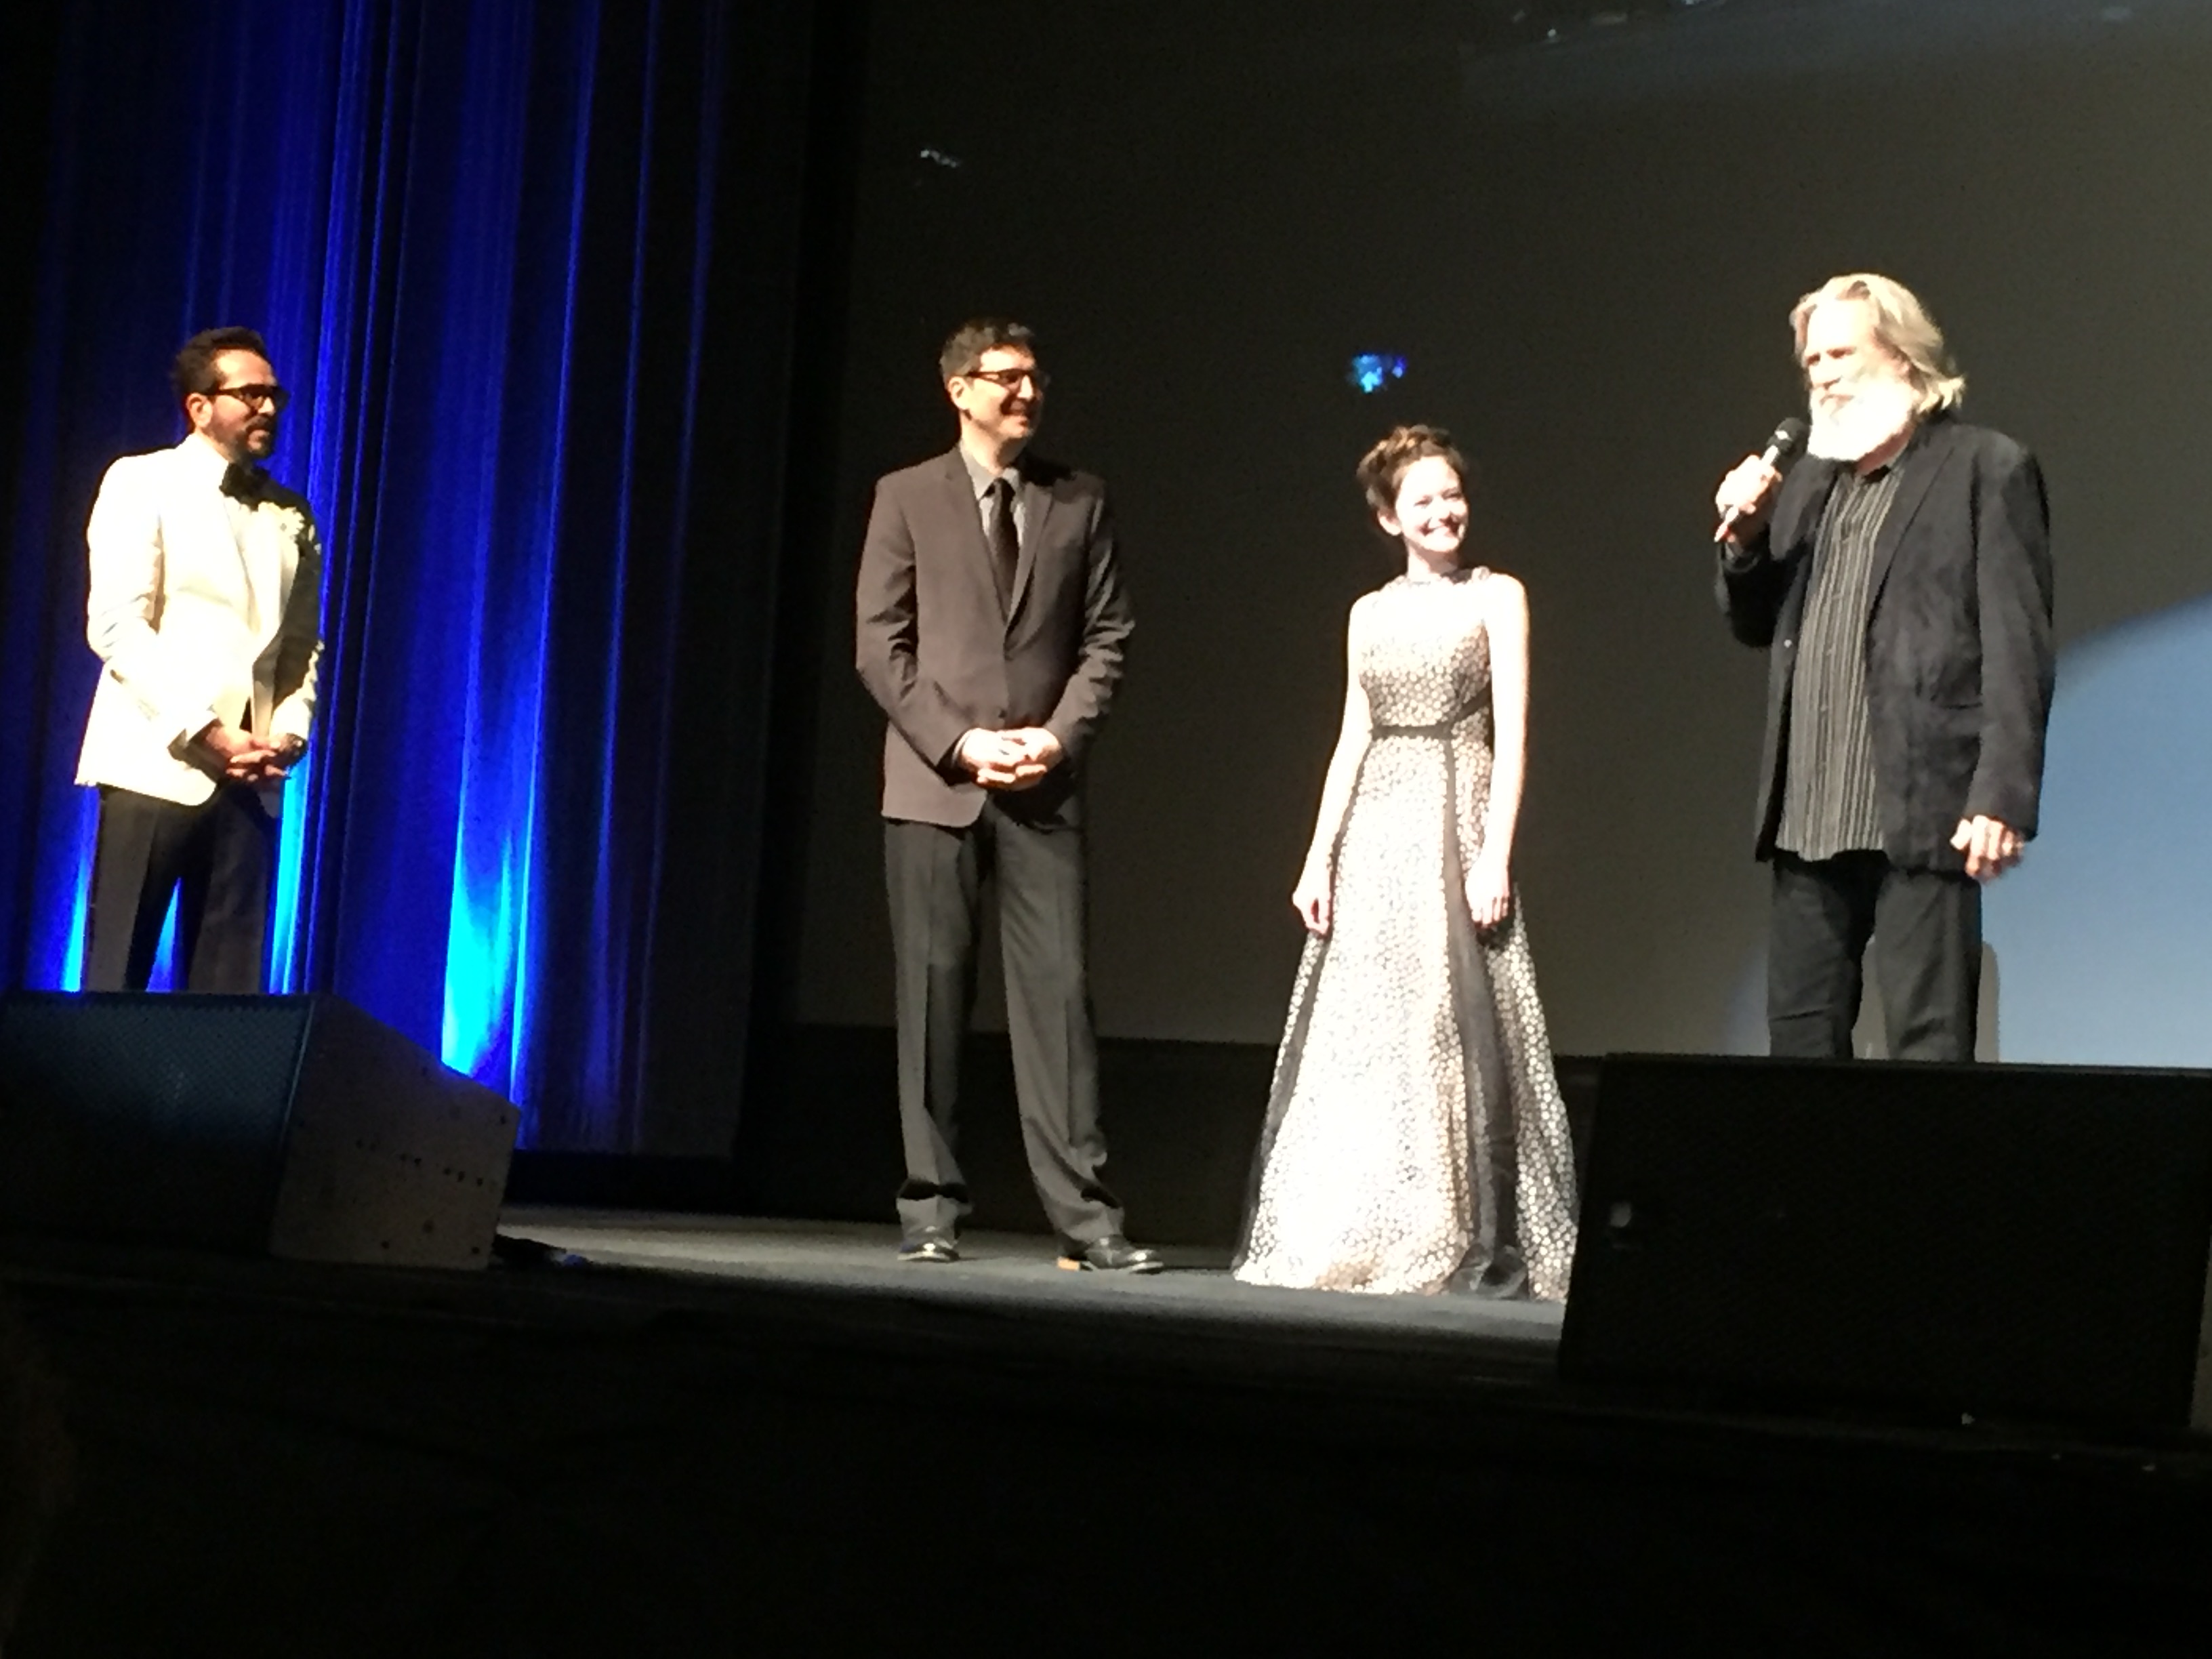 Director and cast of THE LITTLE PRINCE